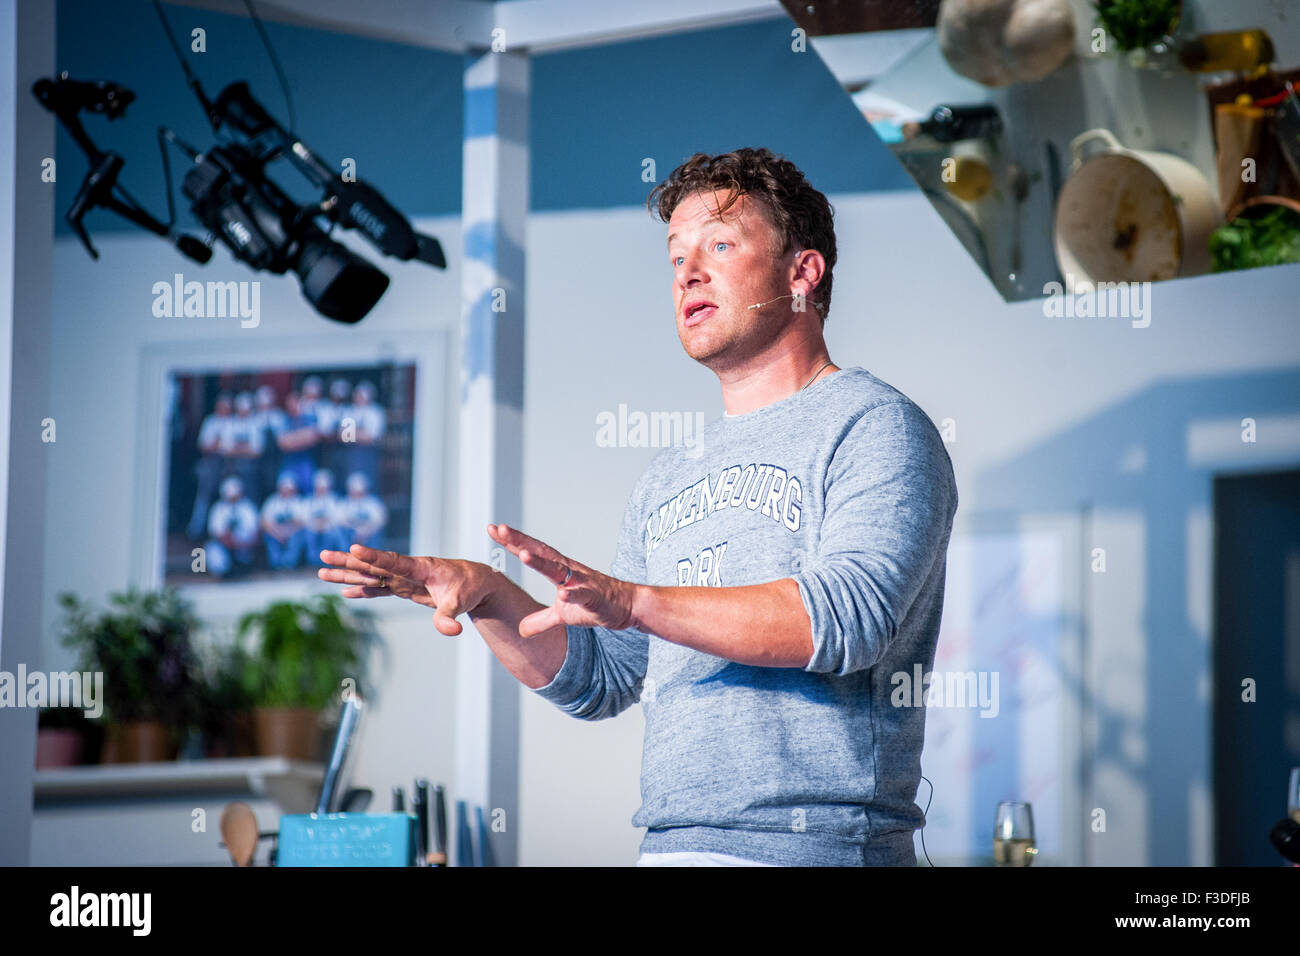 Jamie Oliver asking for public support for his Sugar Tax campaign   Big Feastival, Kingham, Cotswolds,UK Stock Photo